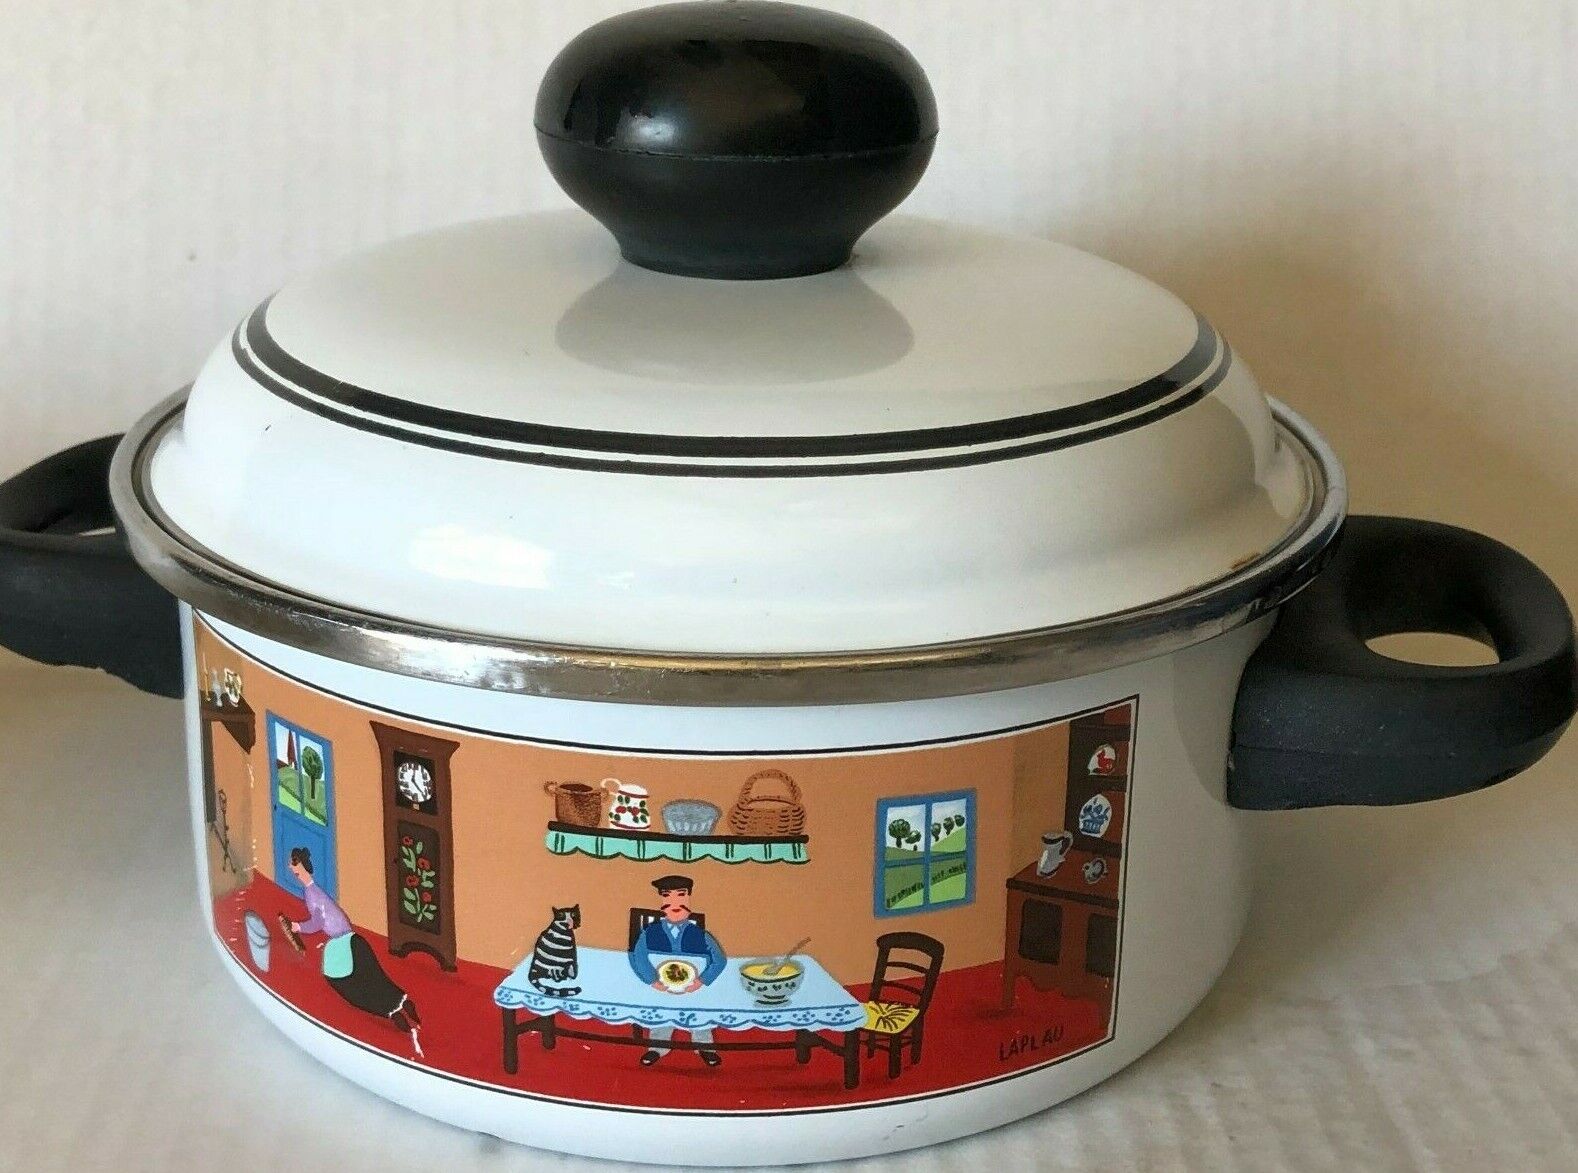 PRE-OWNED VILLEROY AND BOCH ENAMEL COOKWARE WITH LID MADE IN GERMANY